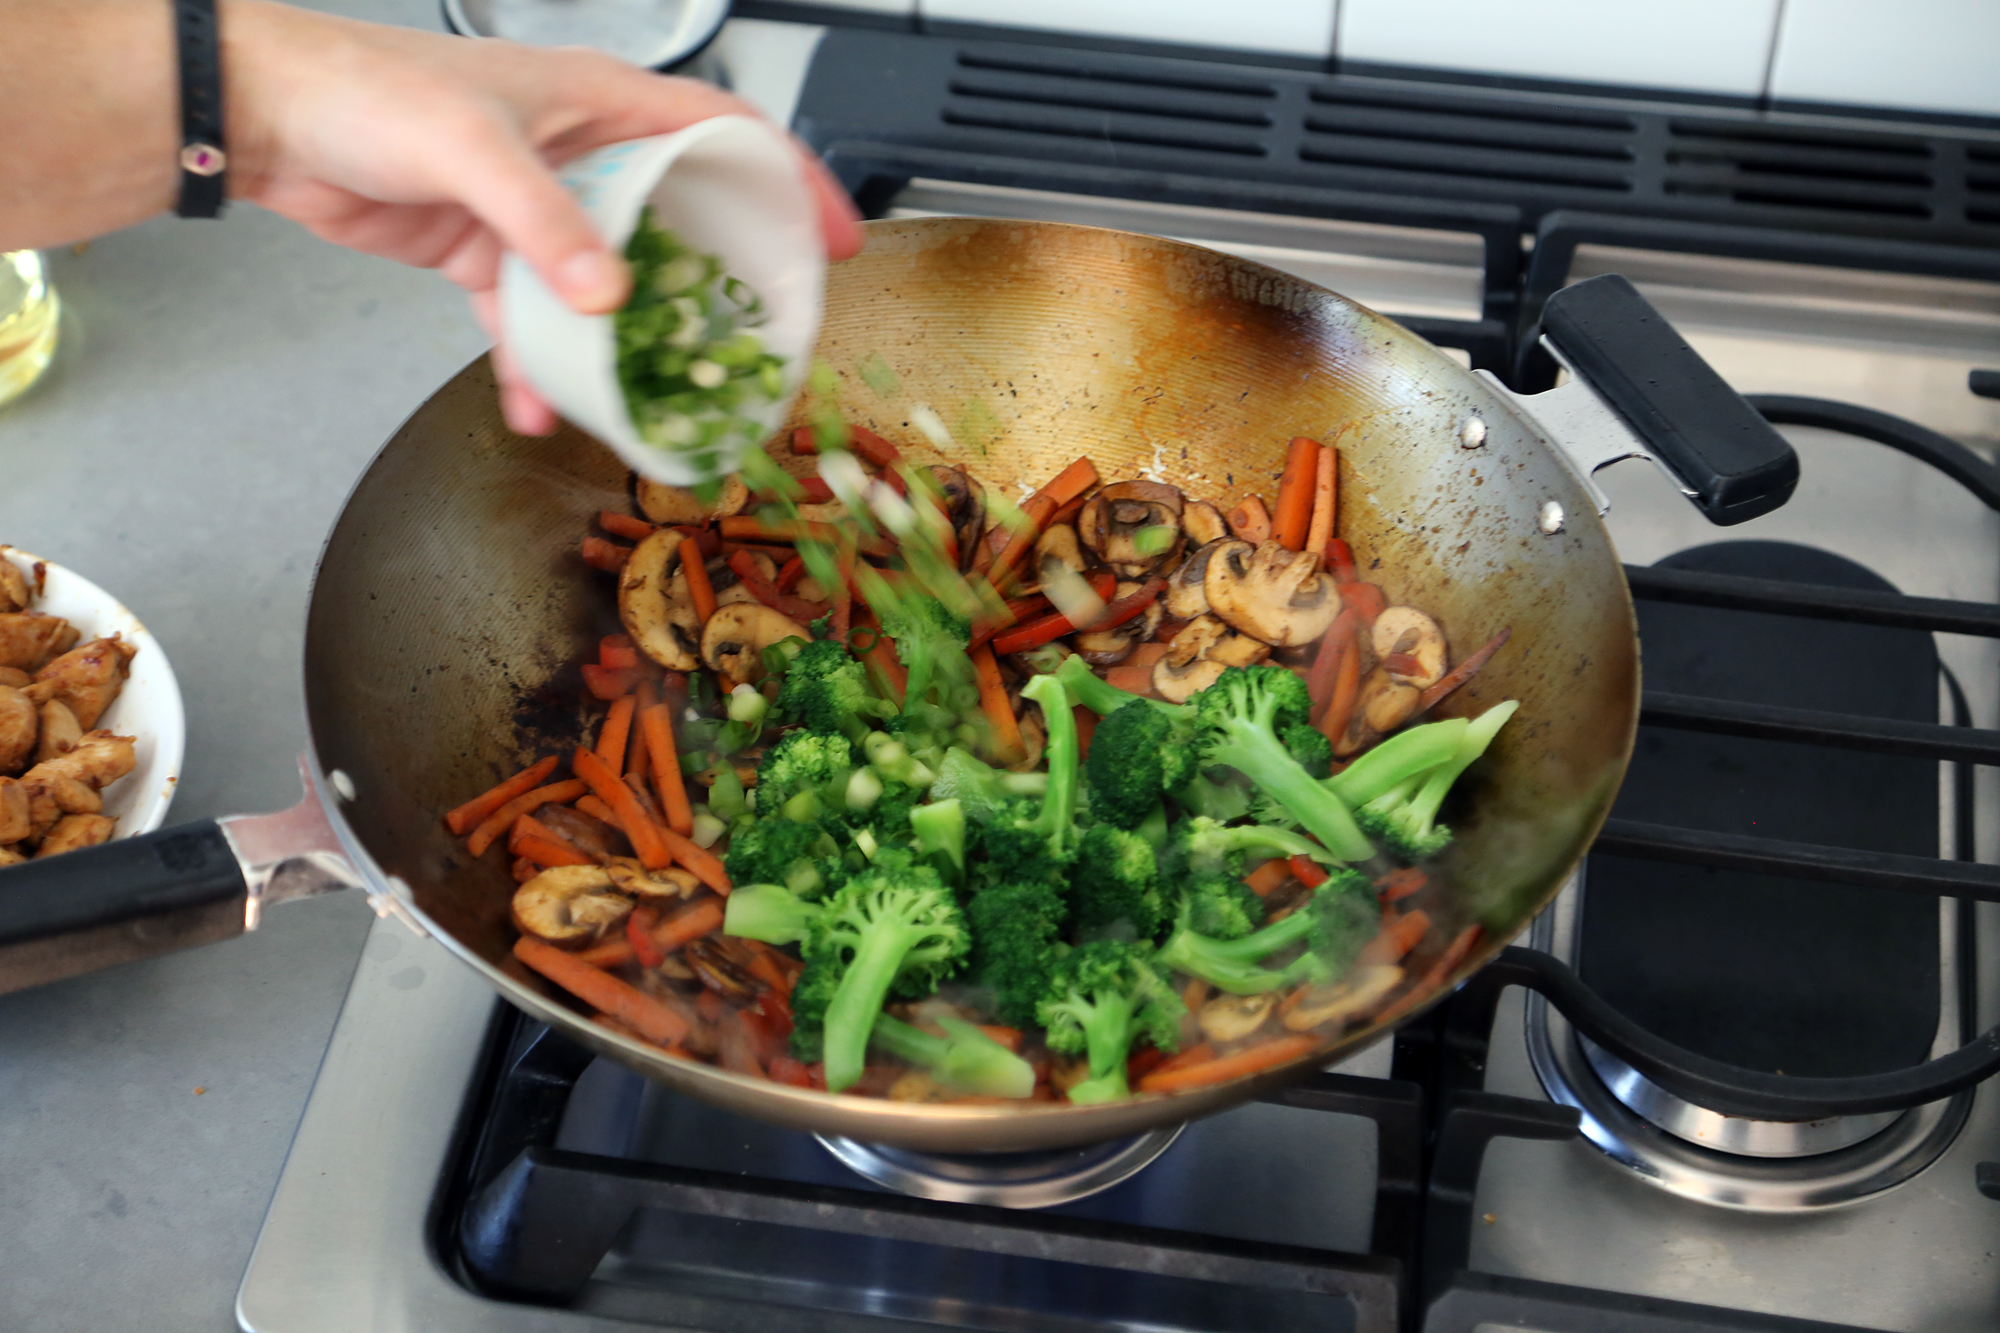 Add the broccoli and green onions and cook until the vegetables are all tender, about 3 minutes.